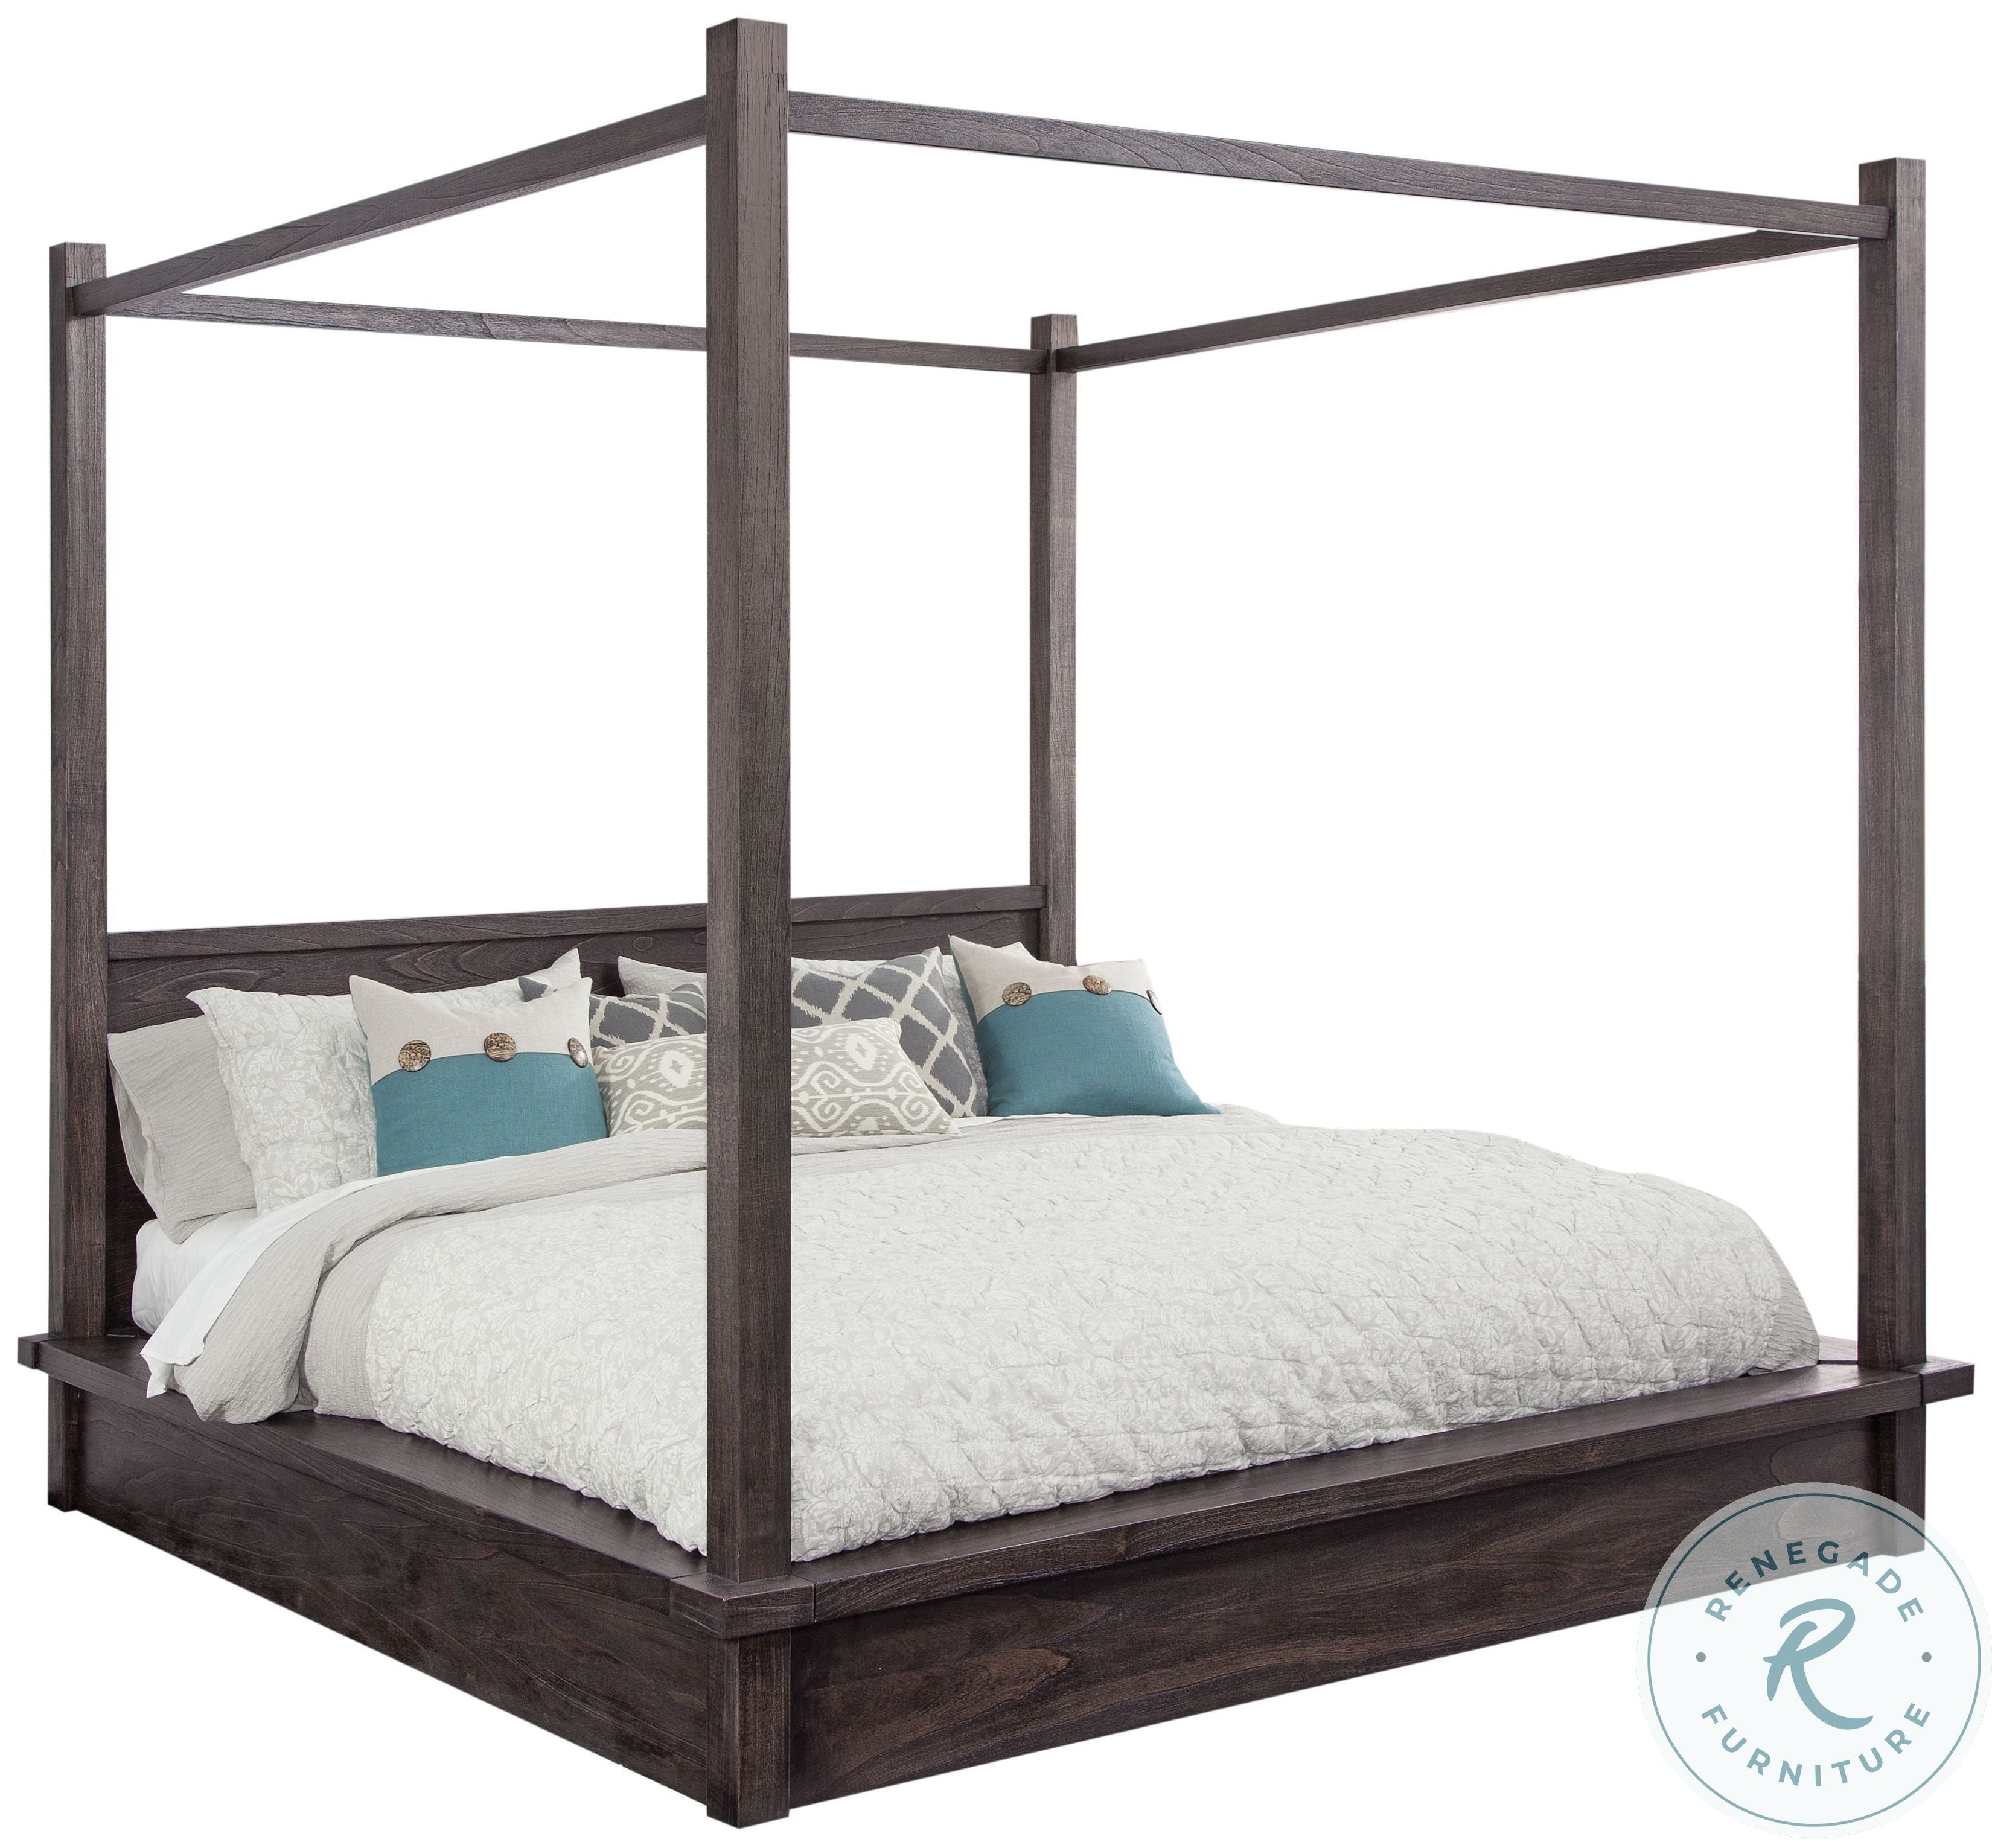 Sandblasted Mindi King Size Canopy Bed Frame in Brown By: Alabama Beds